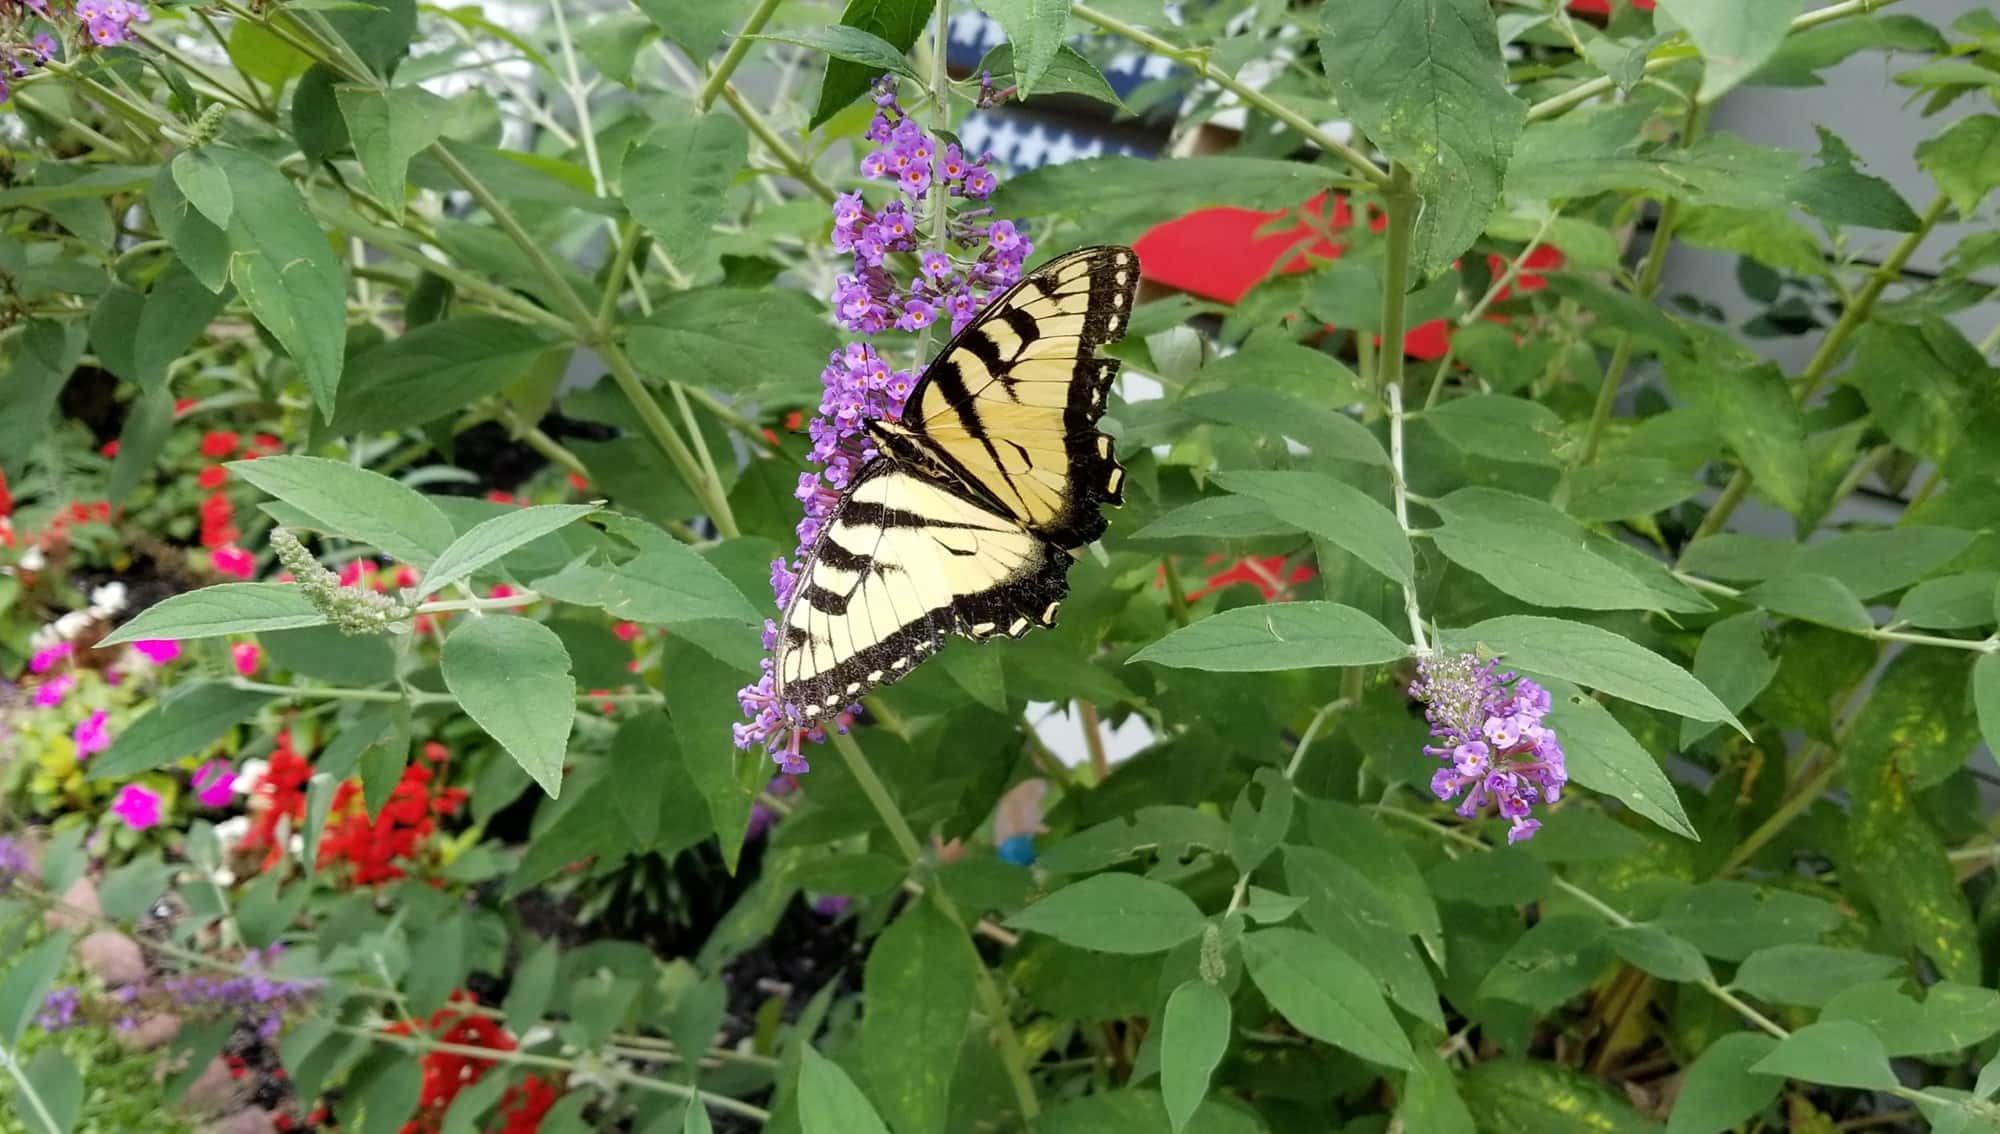 Black and yellow broad-winged butterfly on green bush with purple flowers. 